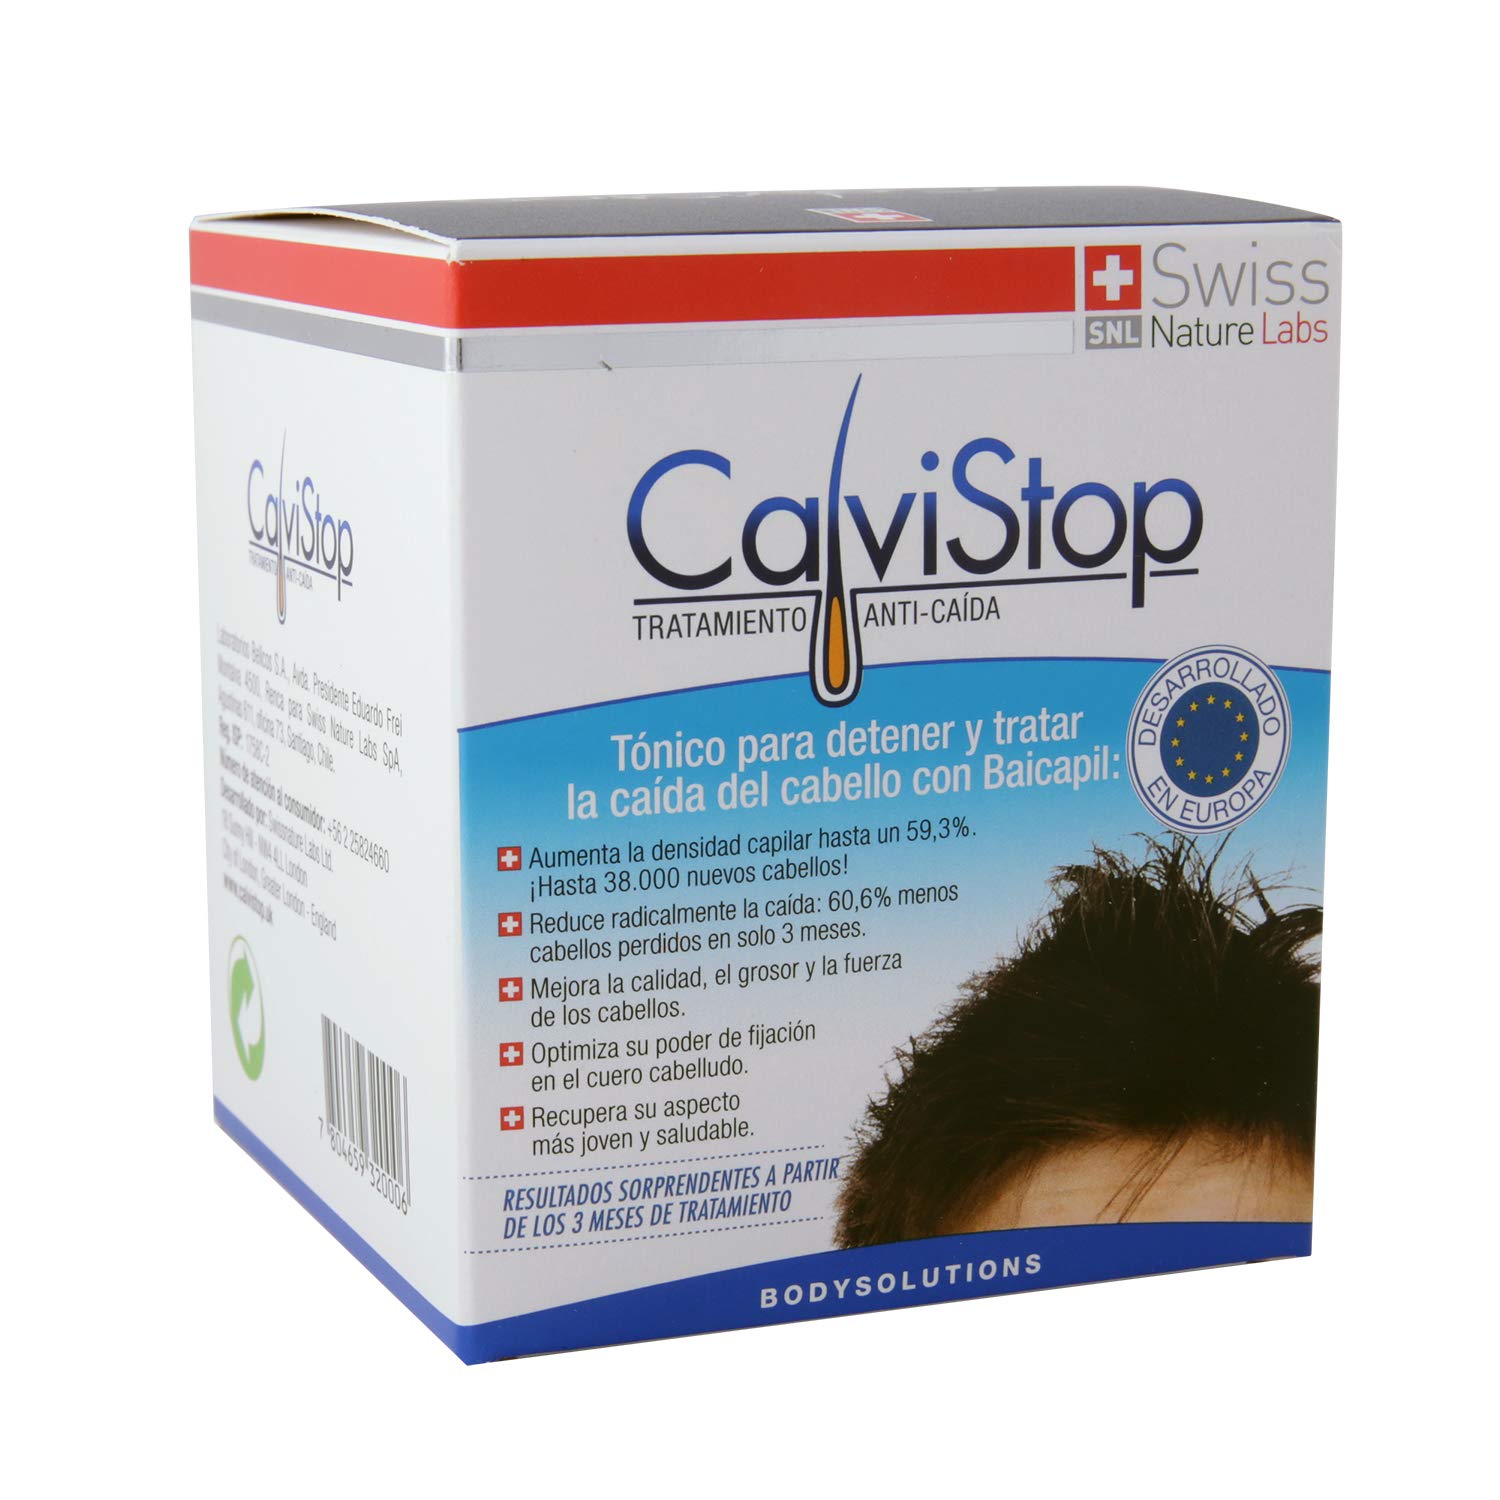 CalviStop, Hair Loss Treatment, Tonic to Stop and Treat Hair Loss, Healthier and Stronger Hair, Each Bottle Includes 4 Onzas, Includes 2 Bottles and 1 Applicator